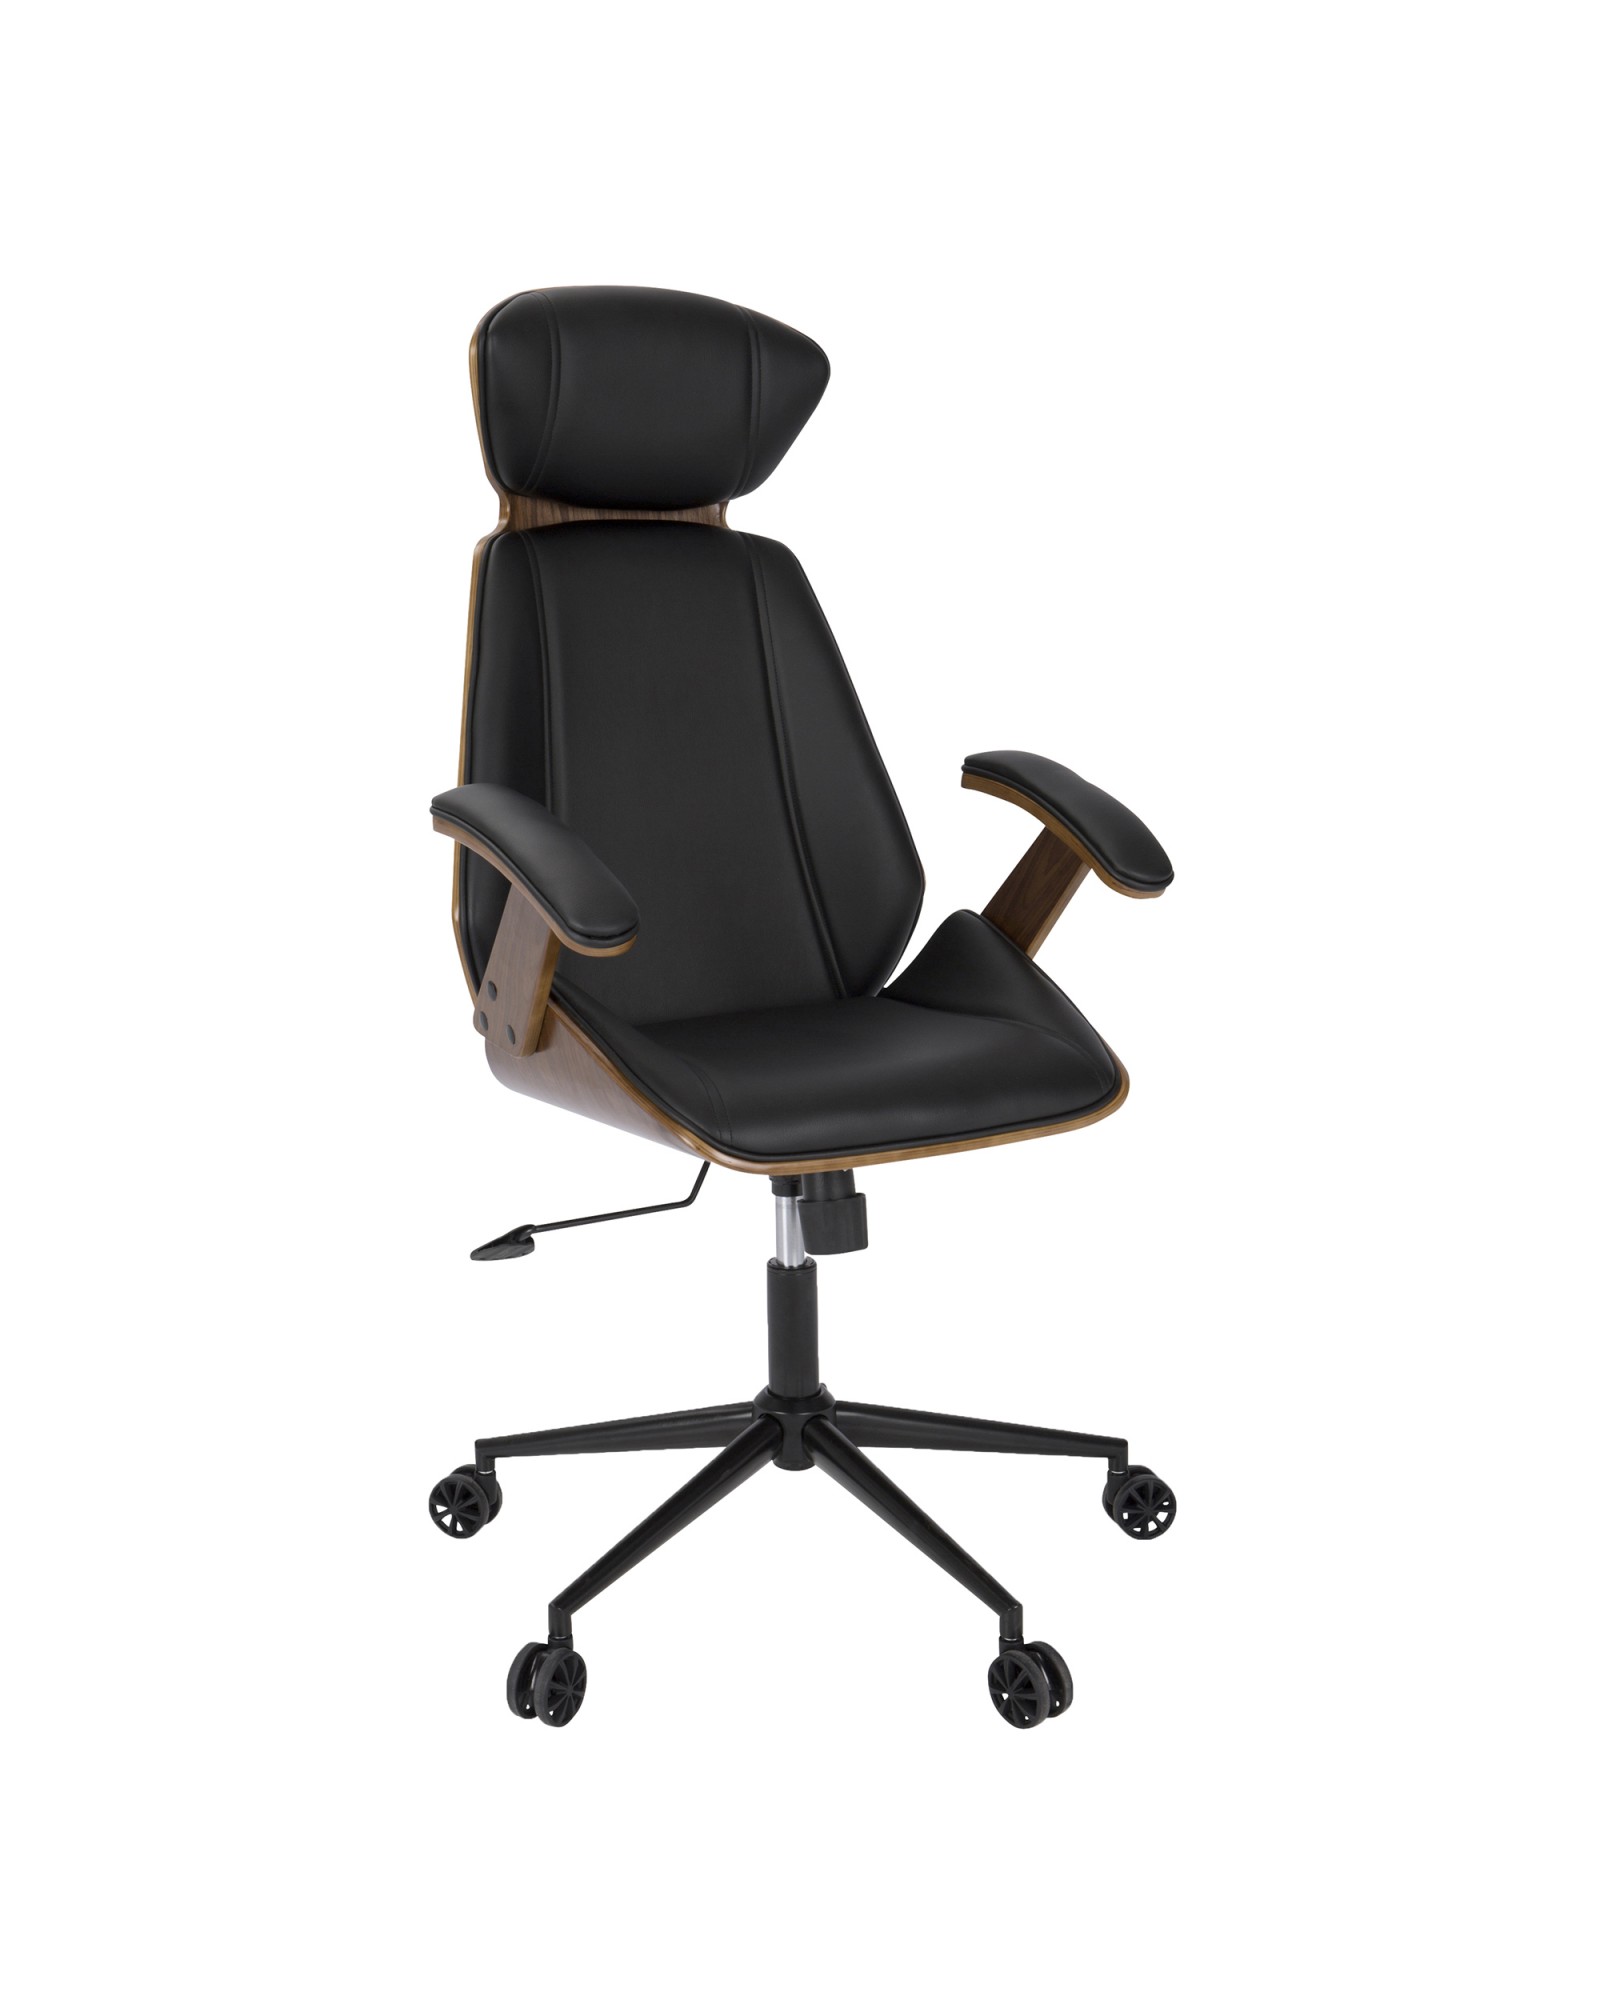 Spectre Mid-Century Modern Adjustable Office Chair in Walnut Wood and Black Faux Leather